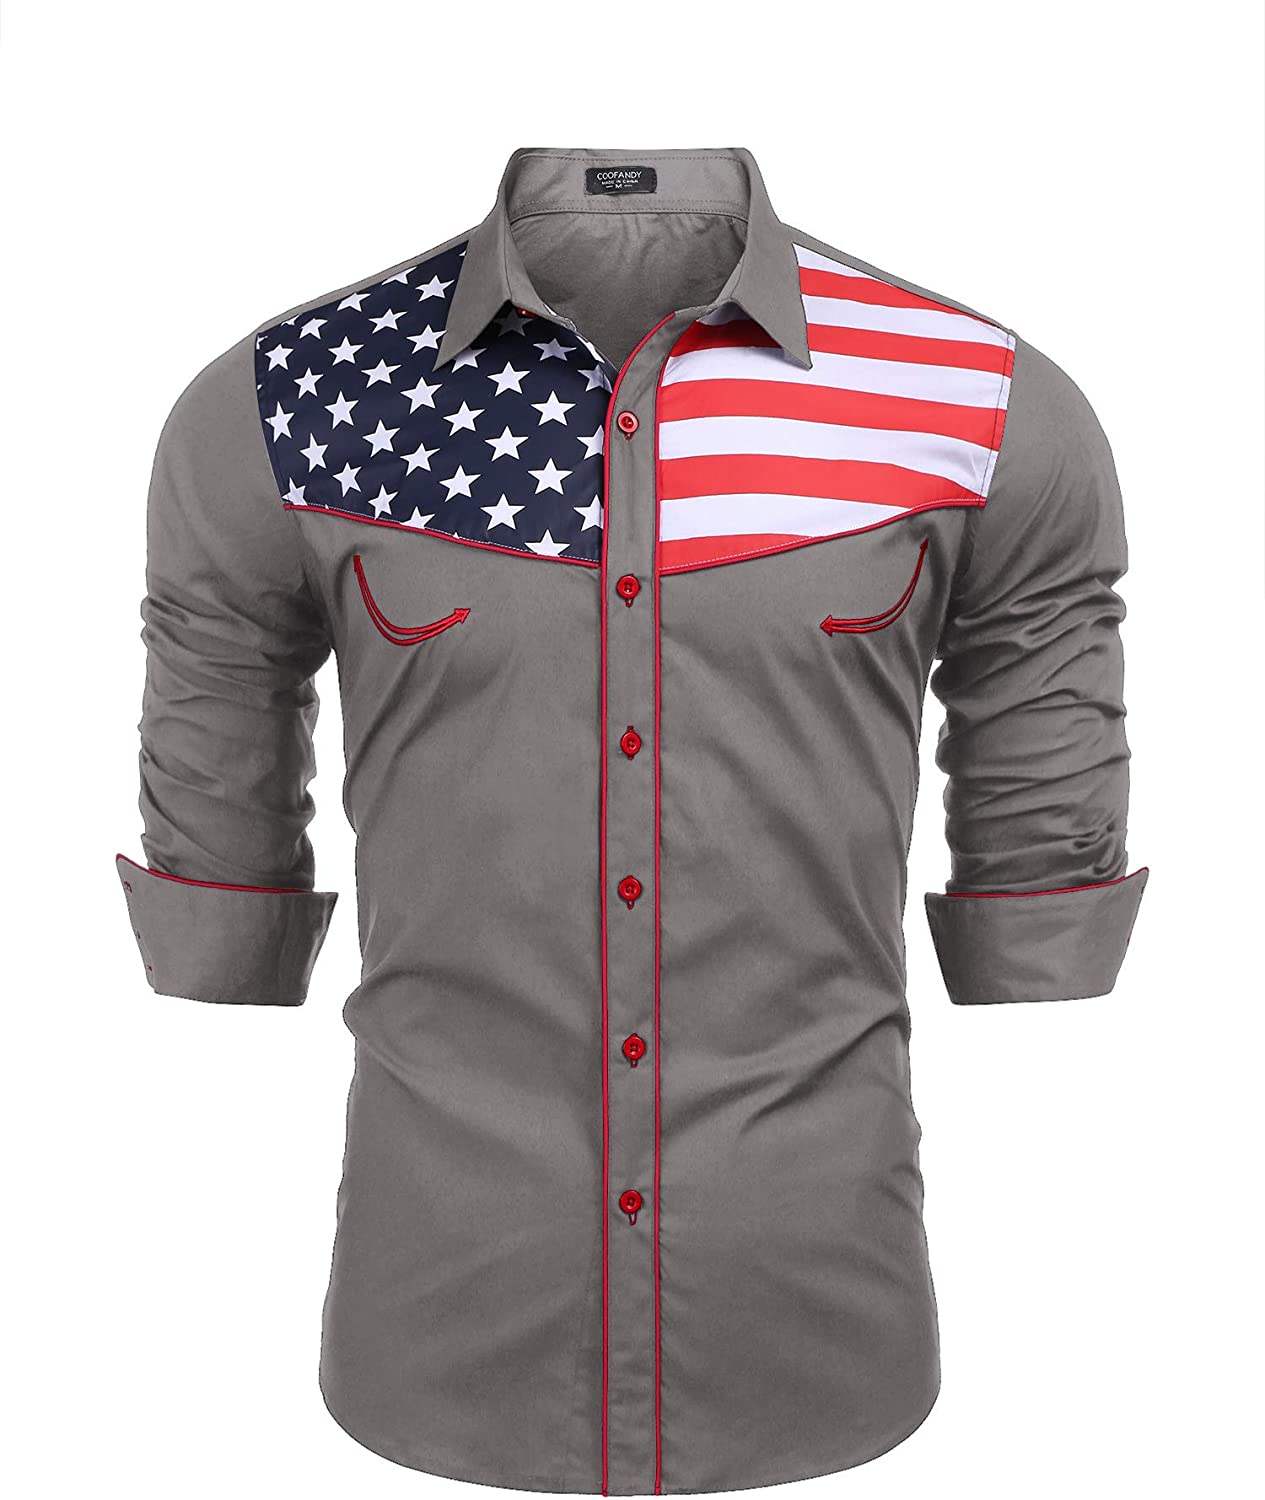 Fubotevic Men Embroidery Casual Long Sleeve Button Up Button Up Dress Work Shirt